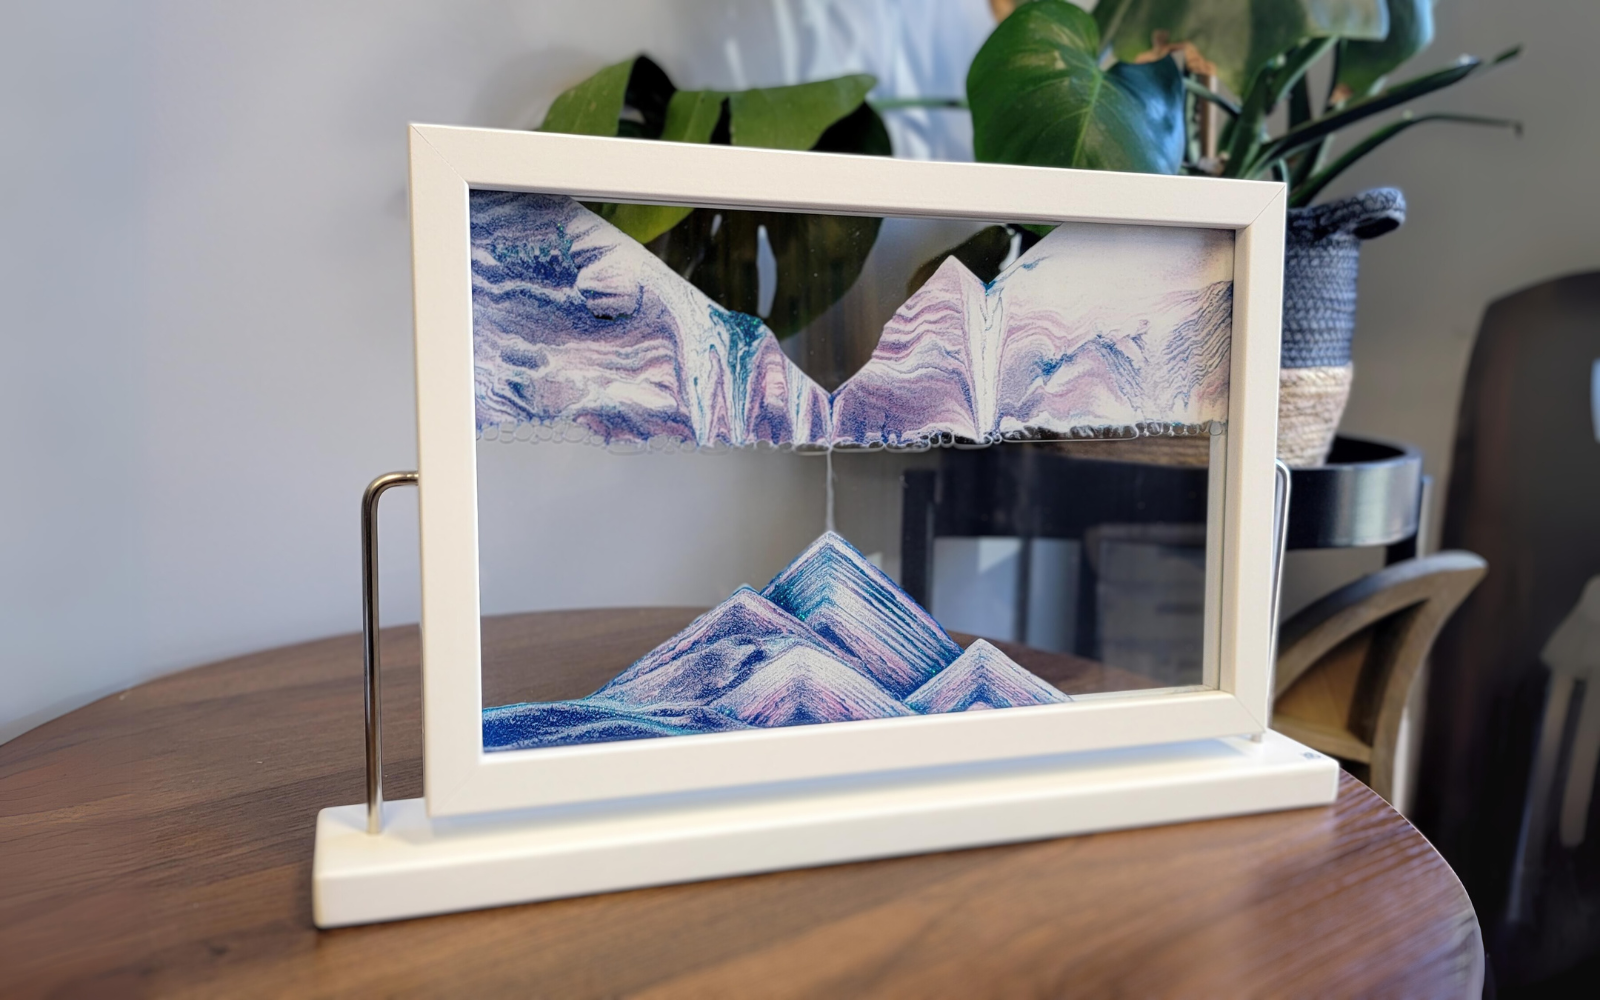 Diamond Painting Frames Magnetic Frames All Sizes Hand-made Custom Wood  strong Magnetic Frames Designed for Diamond Paintings 